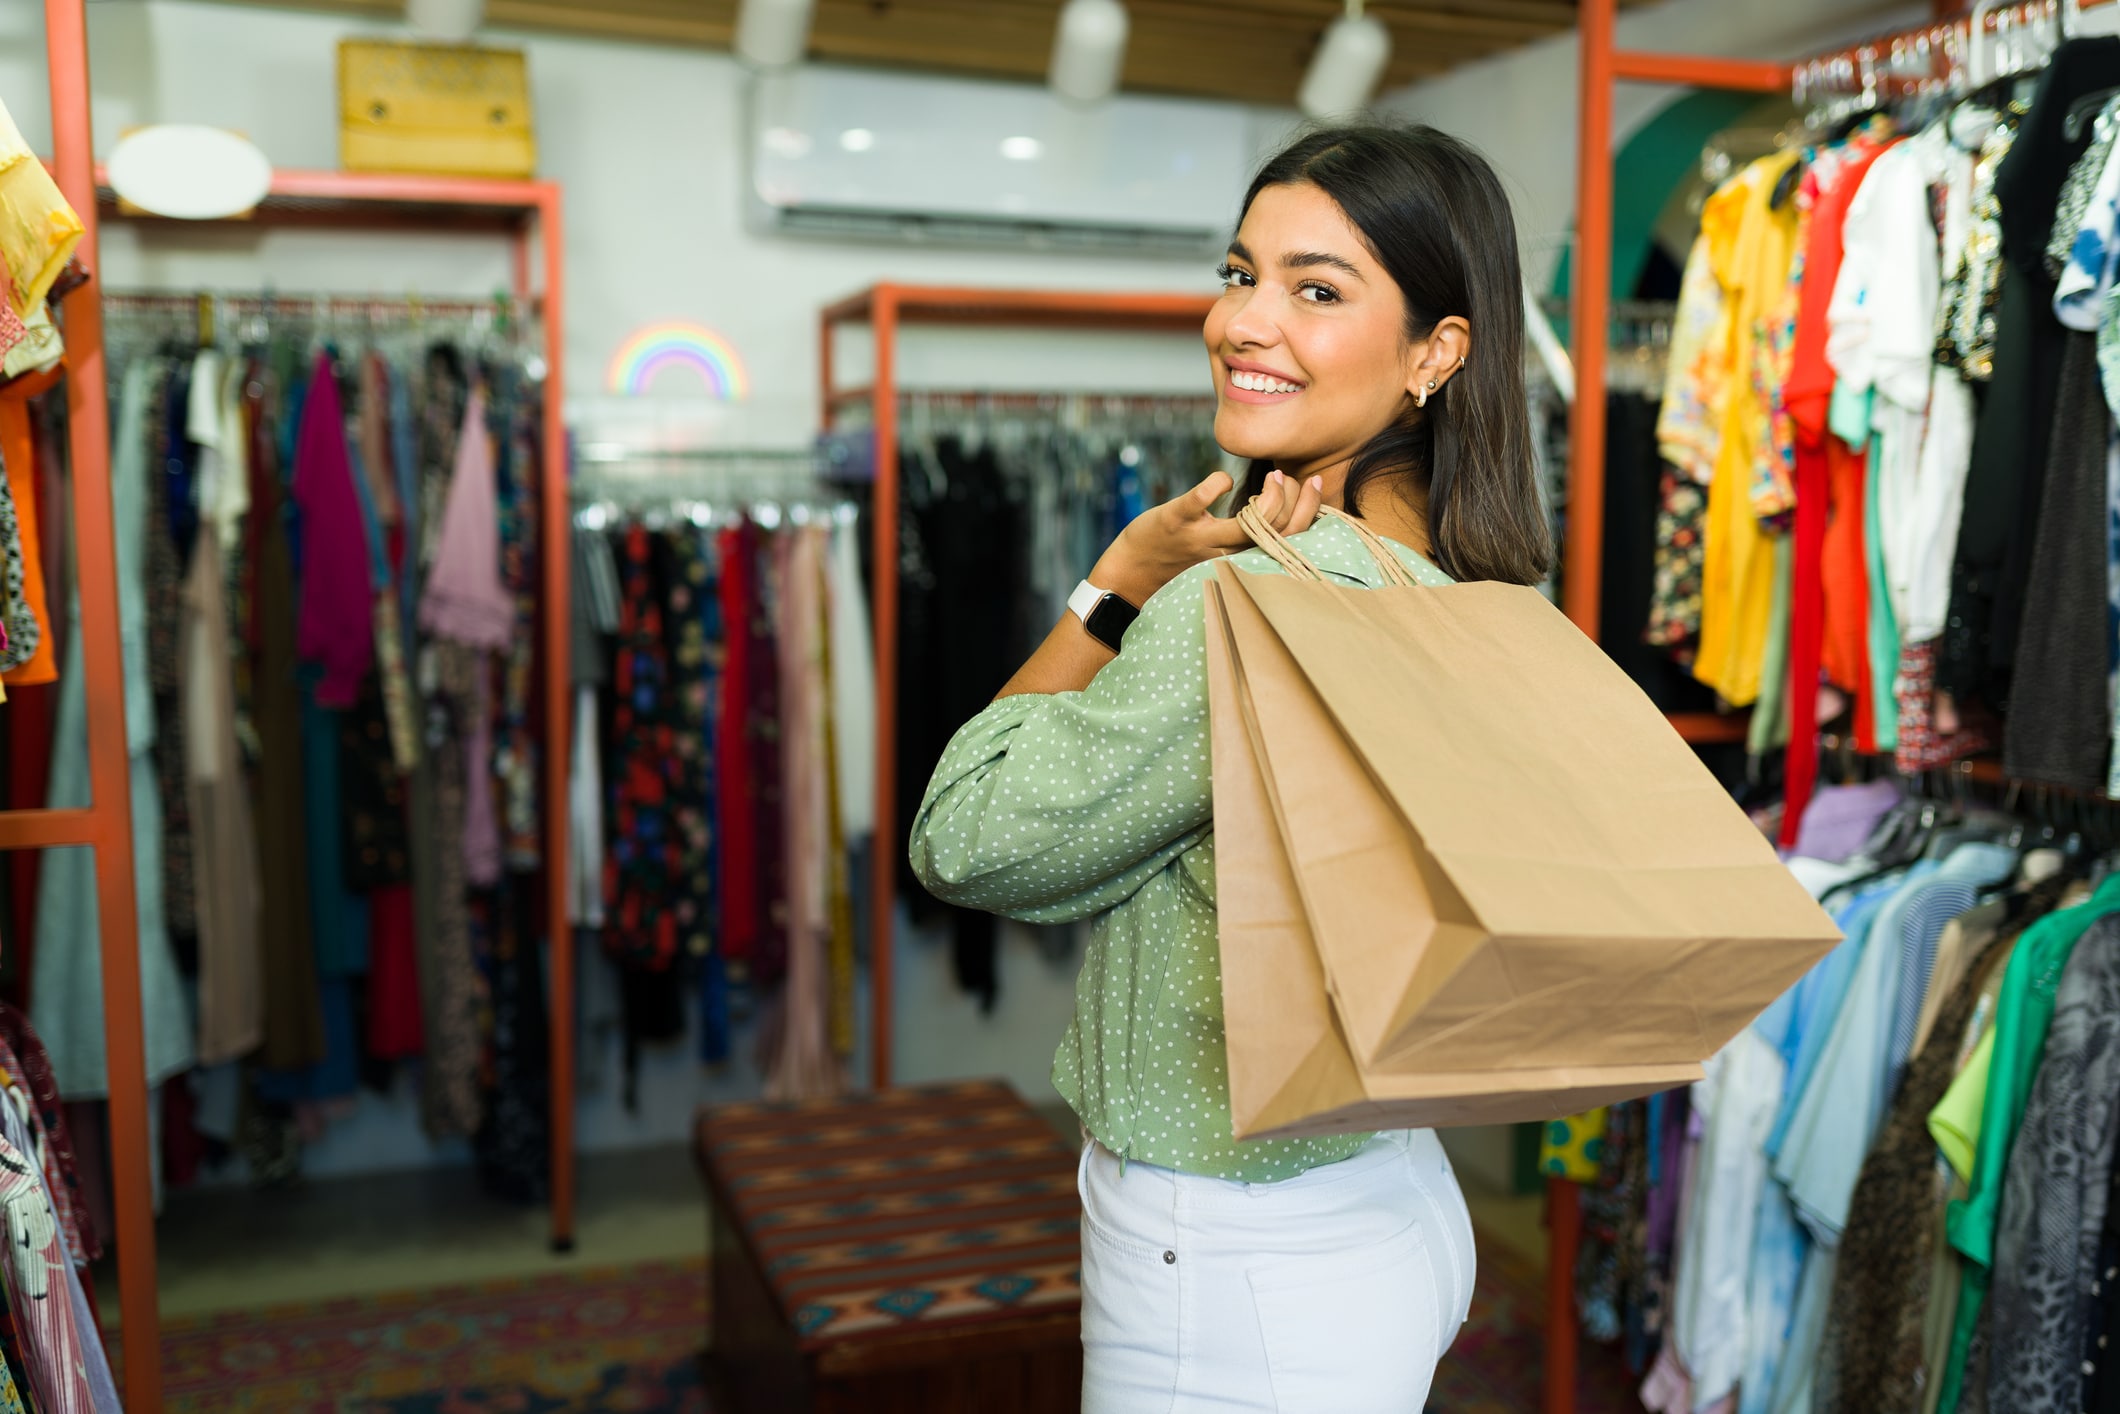 How to dress well on a budget. Woman with brown hair holding a shopping bag over her shoulder, with clothes on racks in the background.